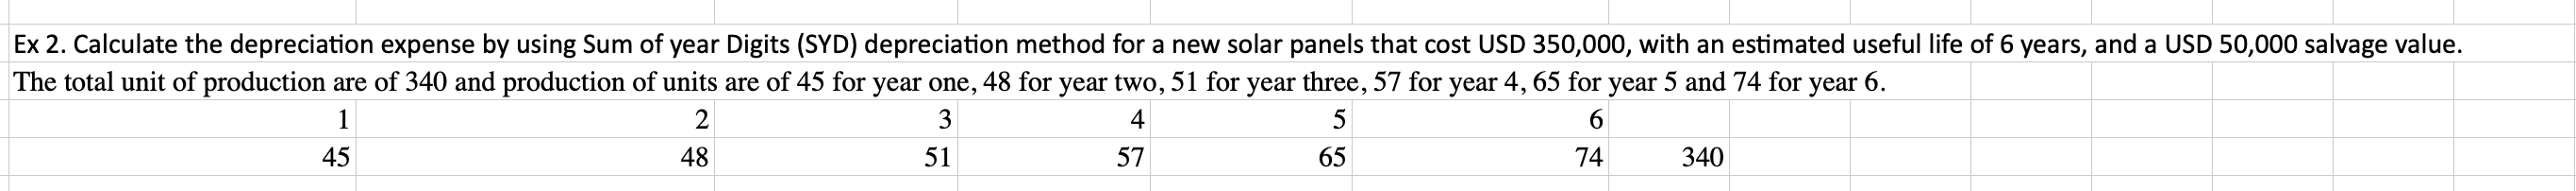 Ex 2. Calculate the depreciation expense by using Sum of year Digits (SYD) depreciation method for a new solar panels that co